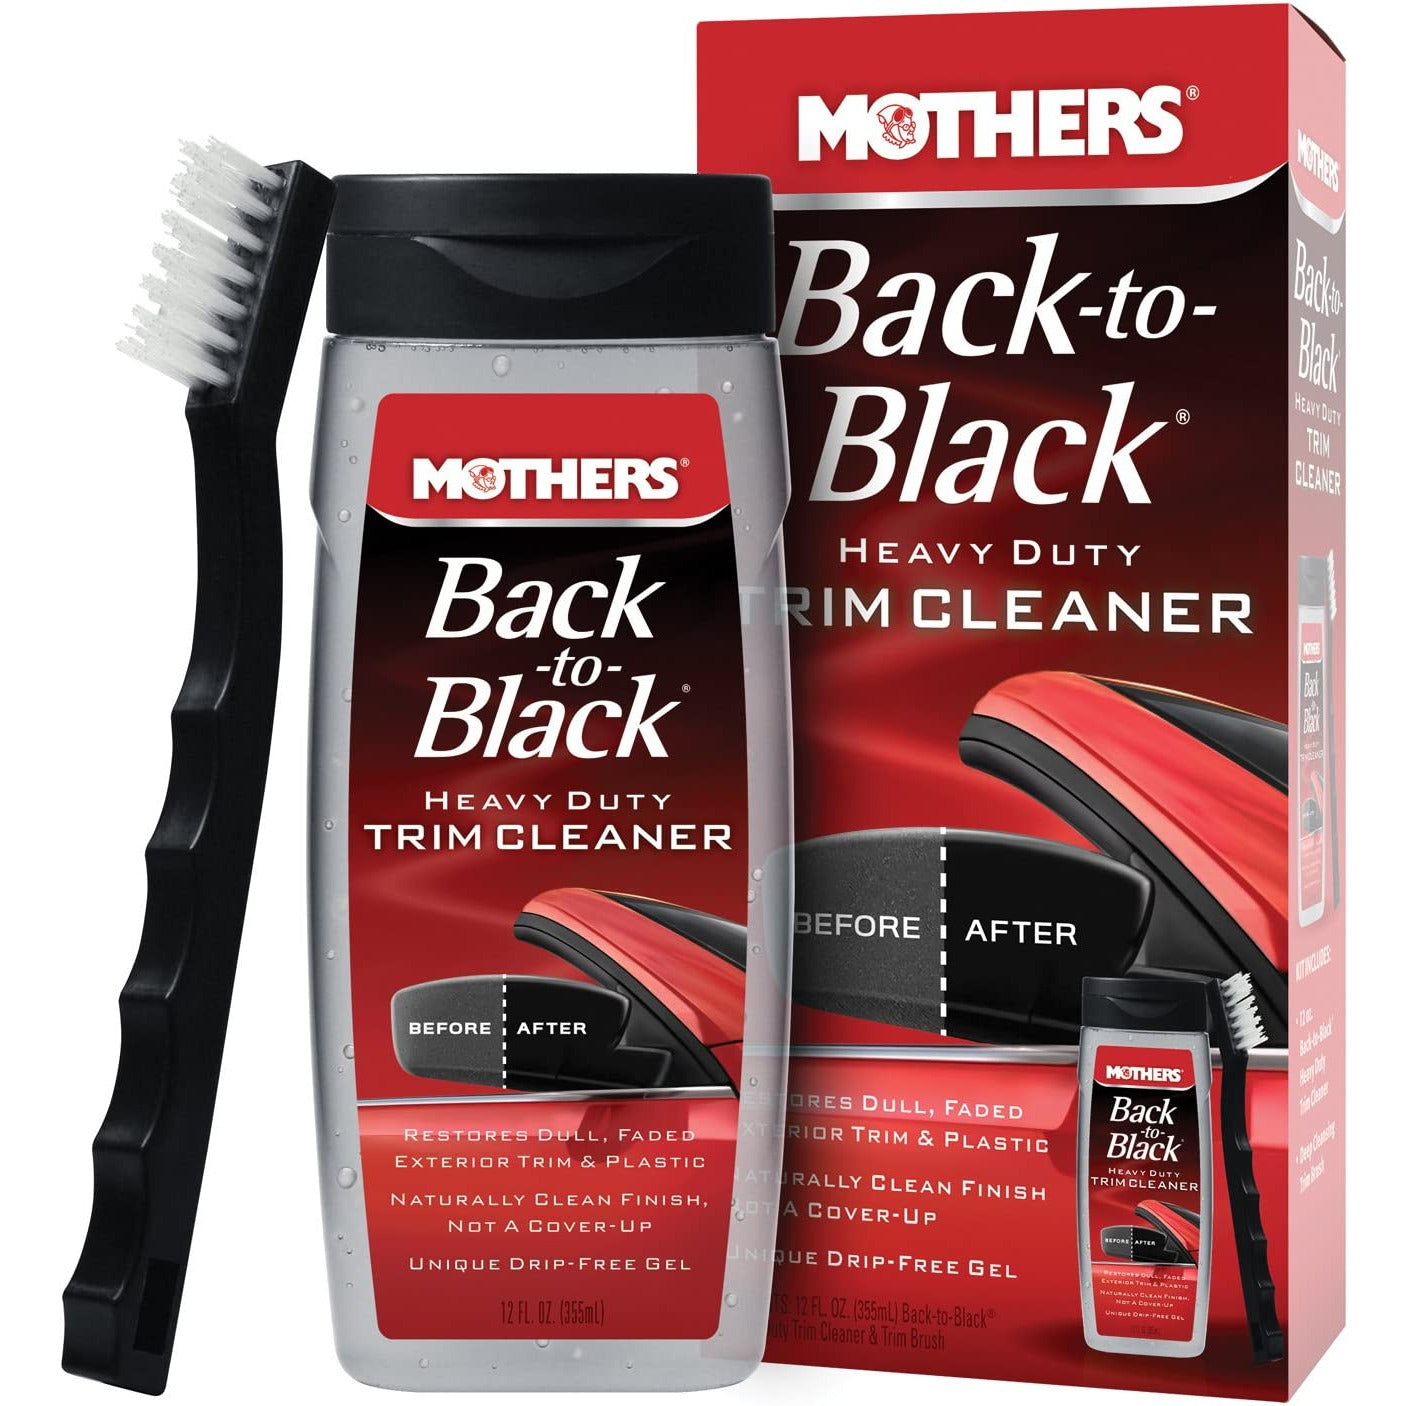 MTH 06141 Mothers Back-to-Black Heavy Duty Trim Cleaner Kit